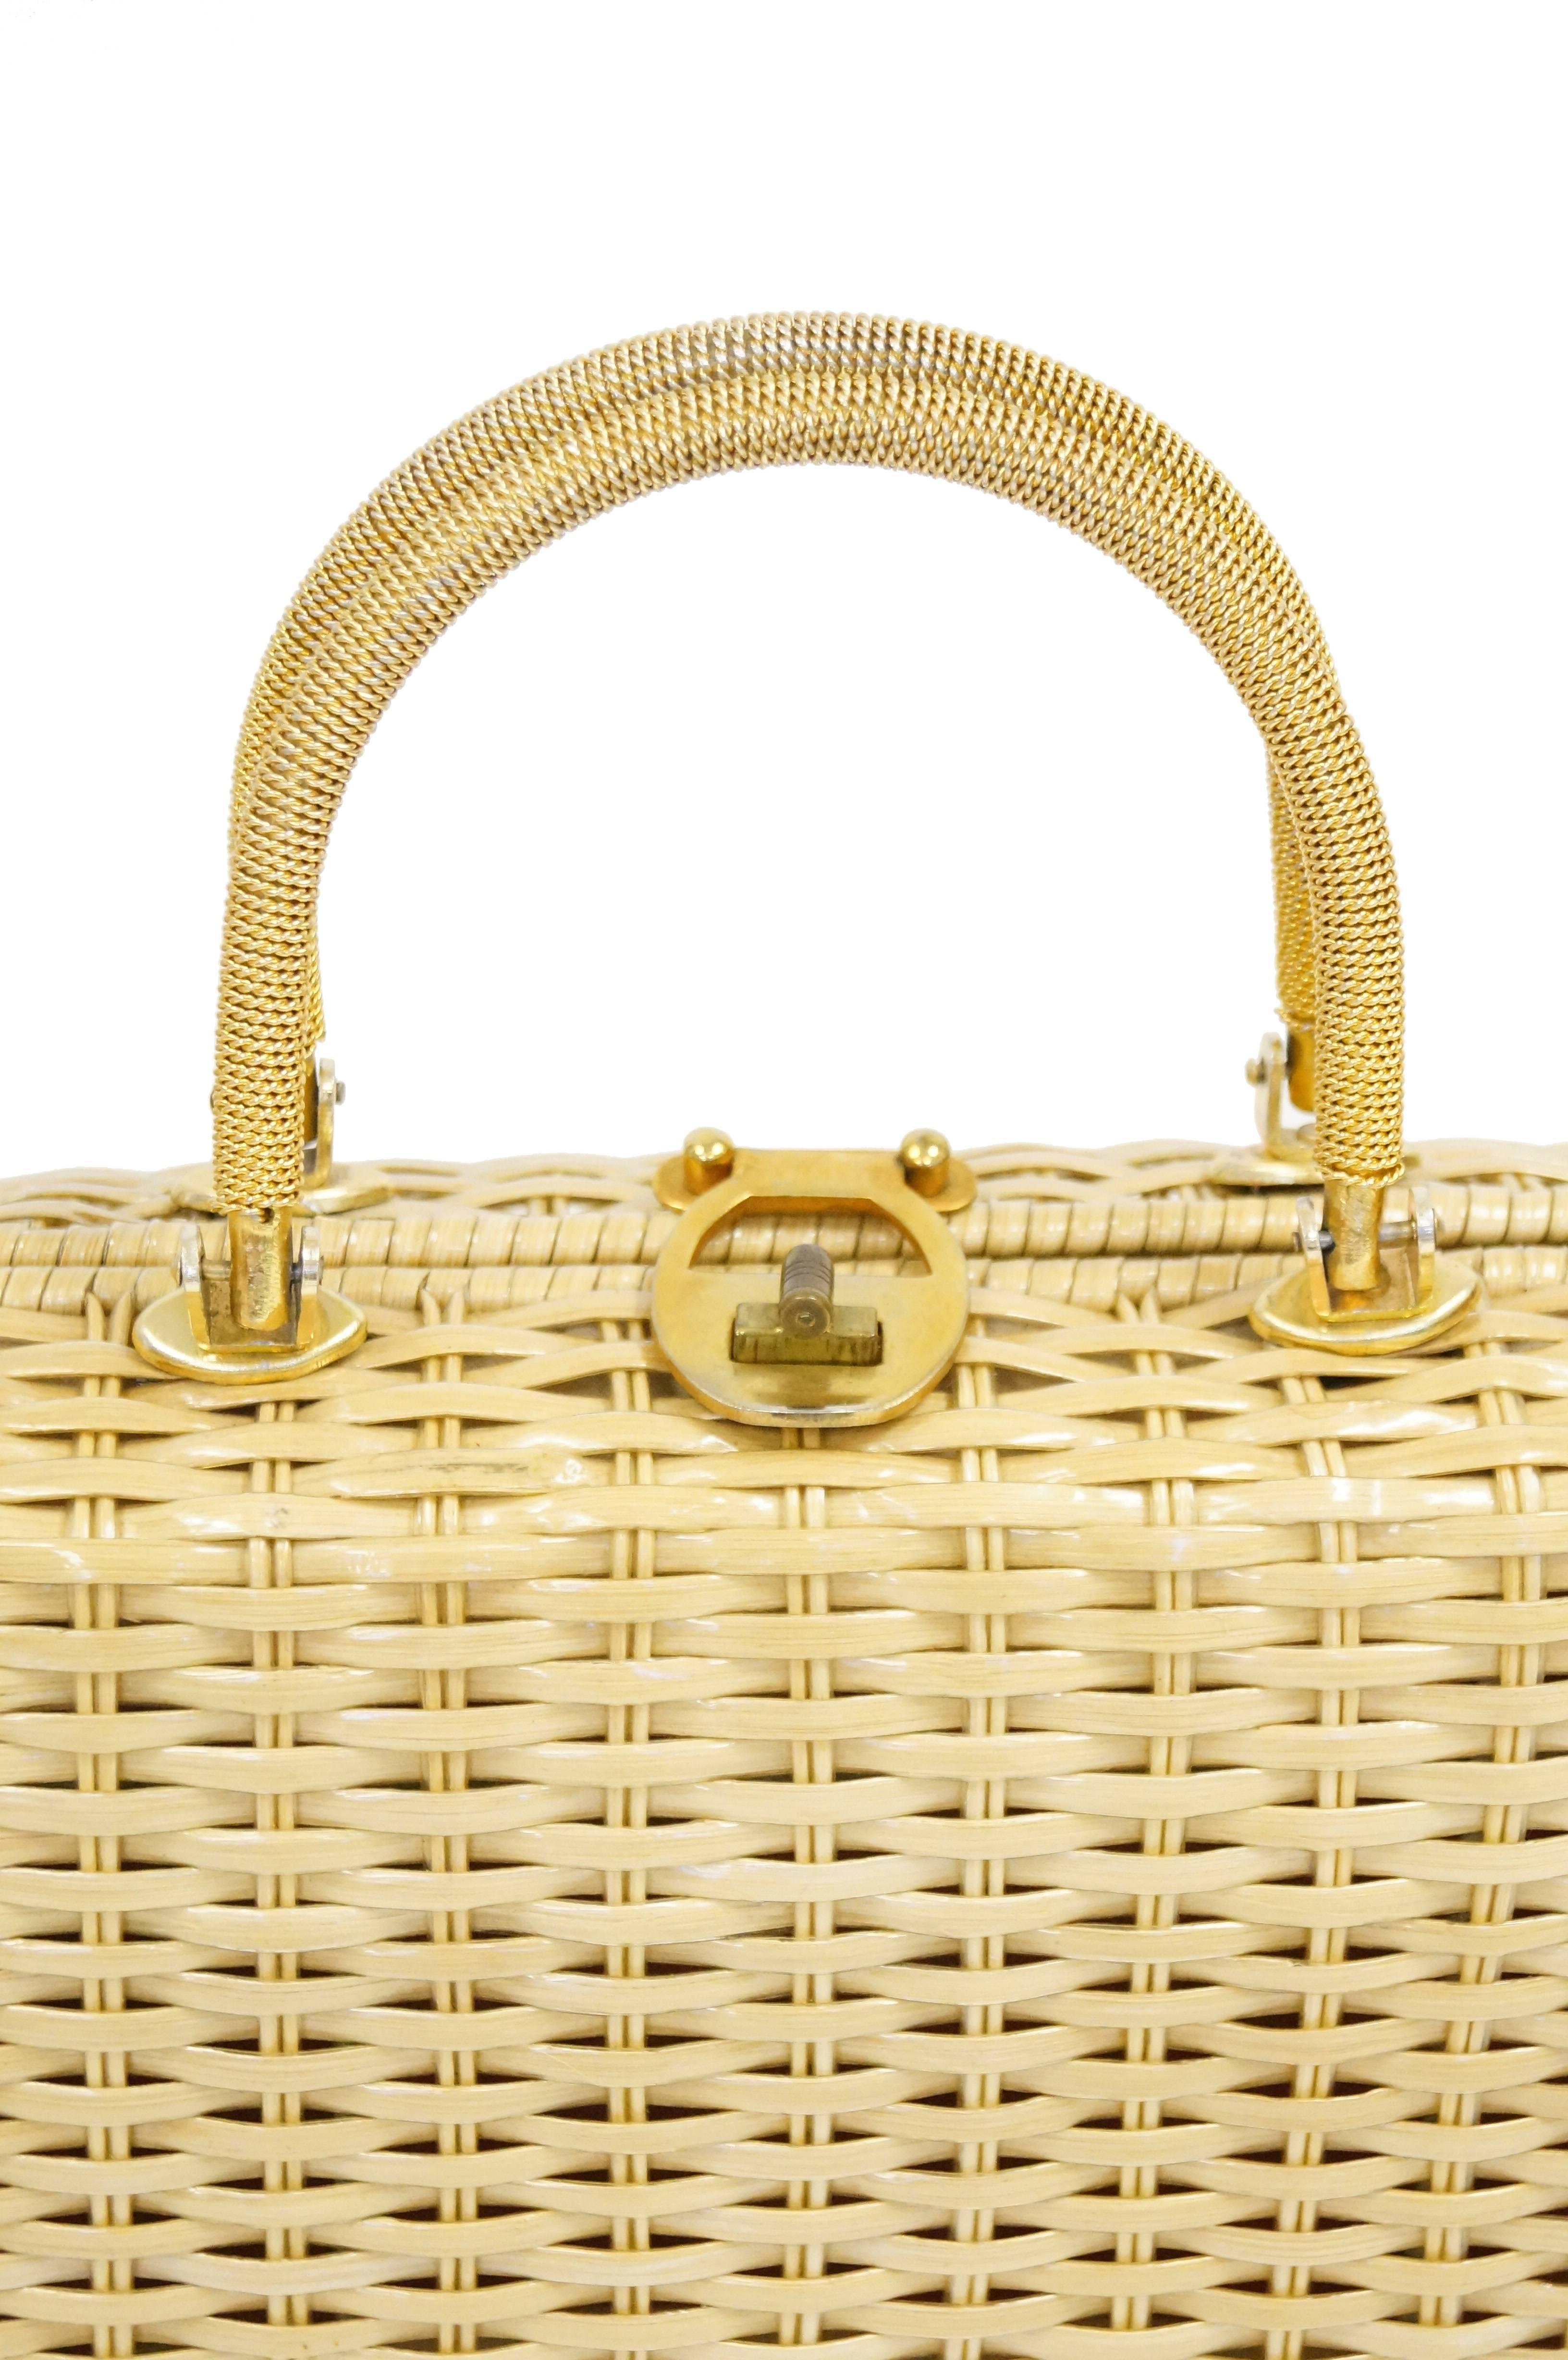 Playful yet elegant natural flaxen - tone wicker handbag by Lesco Lona. The bag is a structured briefcase composed of clear plastic coated wicker, spiraled gold handles, and a gold twist lock. The interior is plastic lined and features a wide